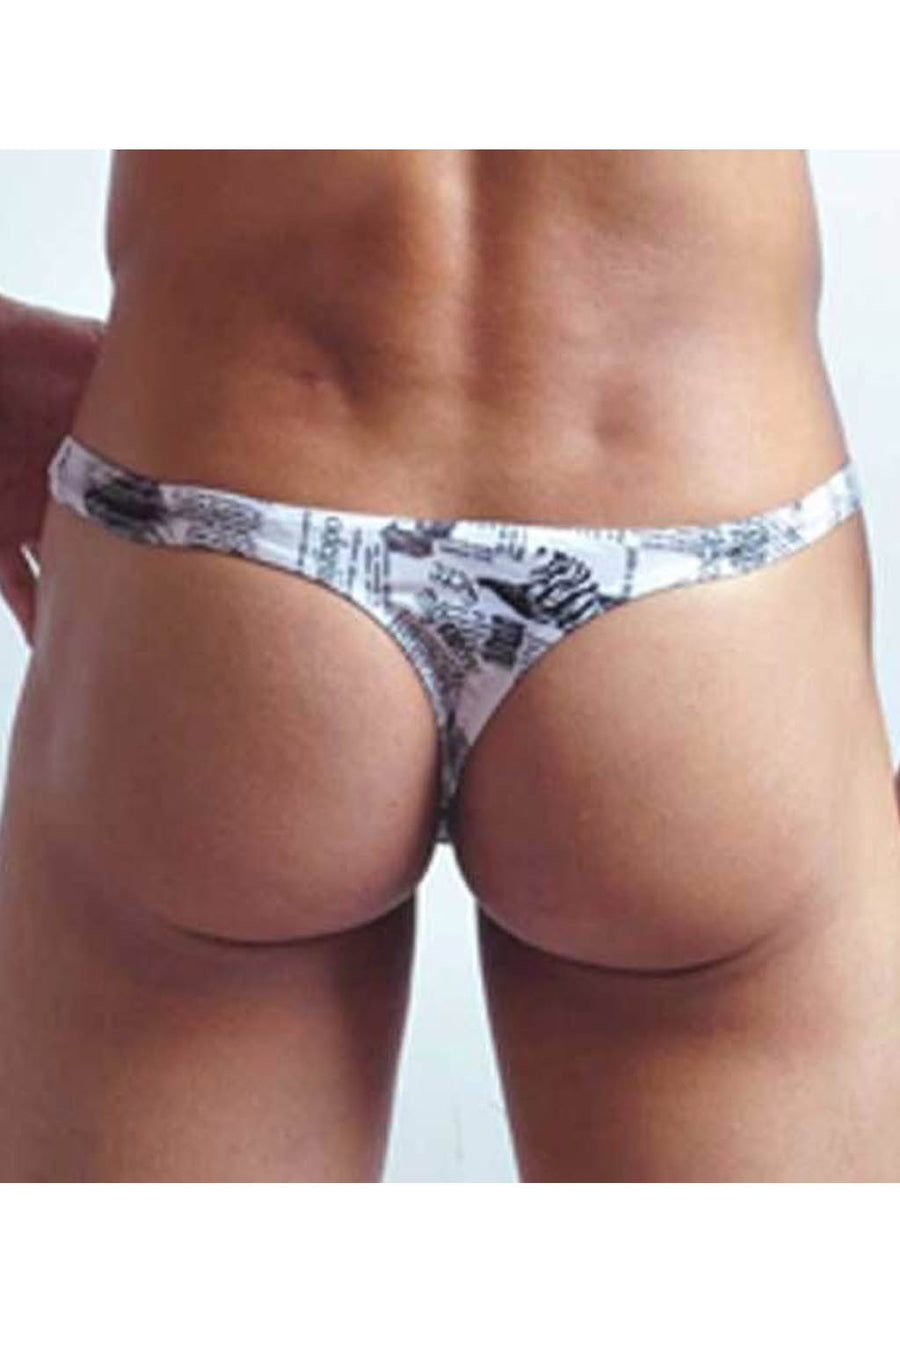 Manview News Print Pouch Thong Lowrise Underwear